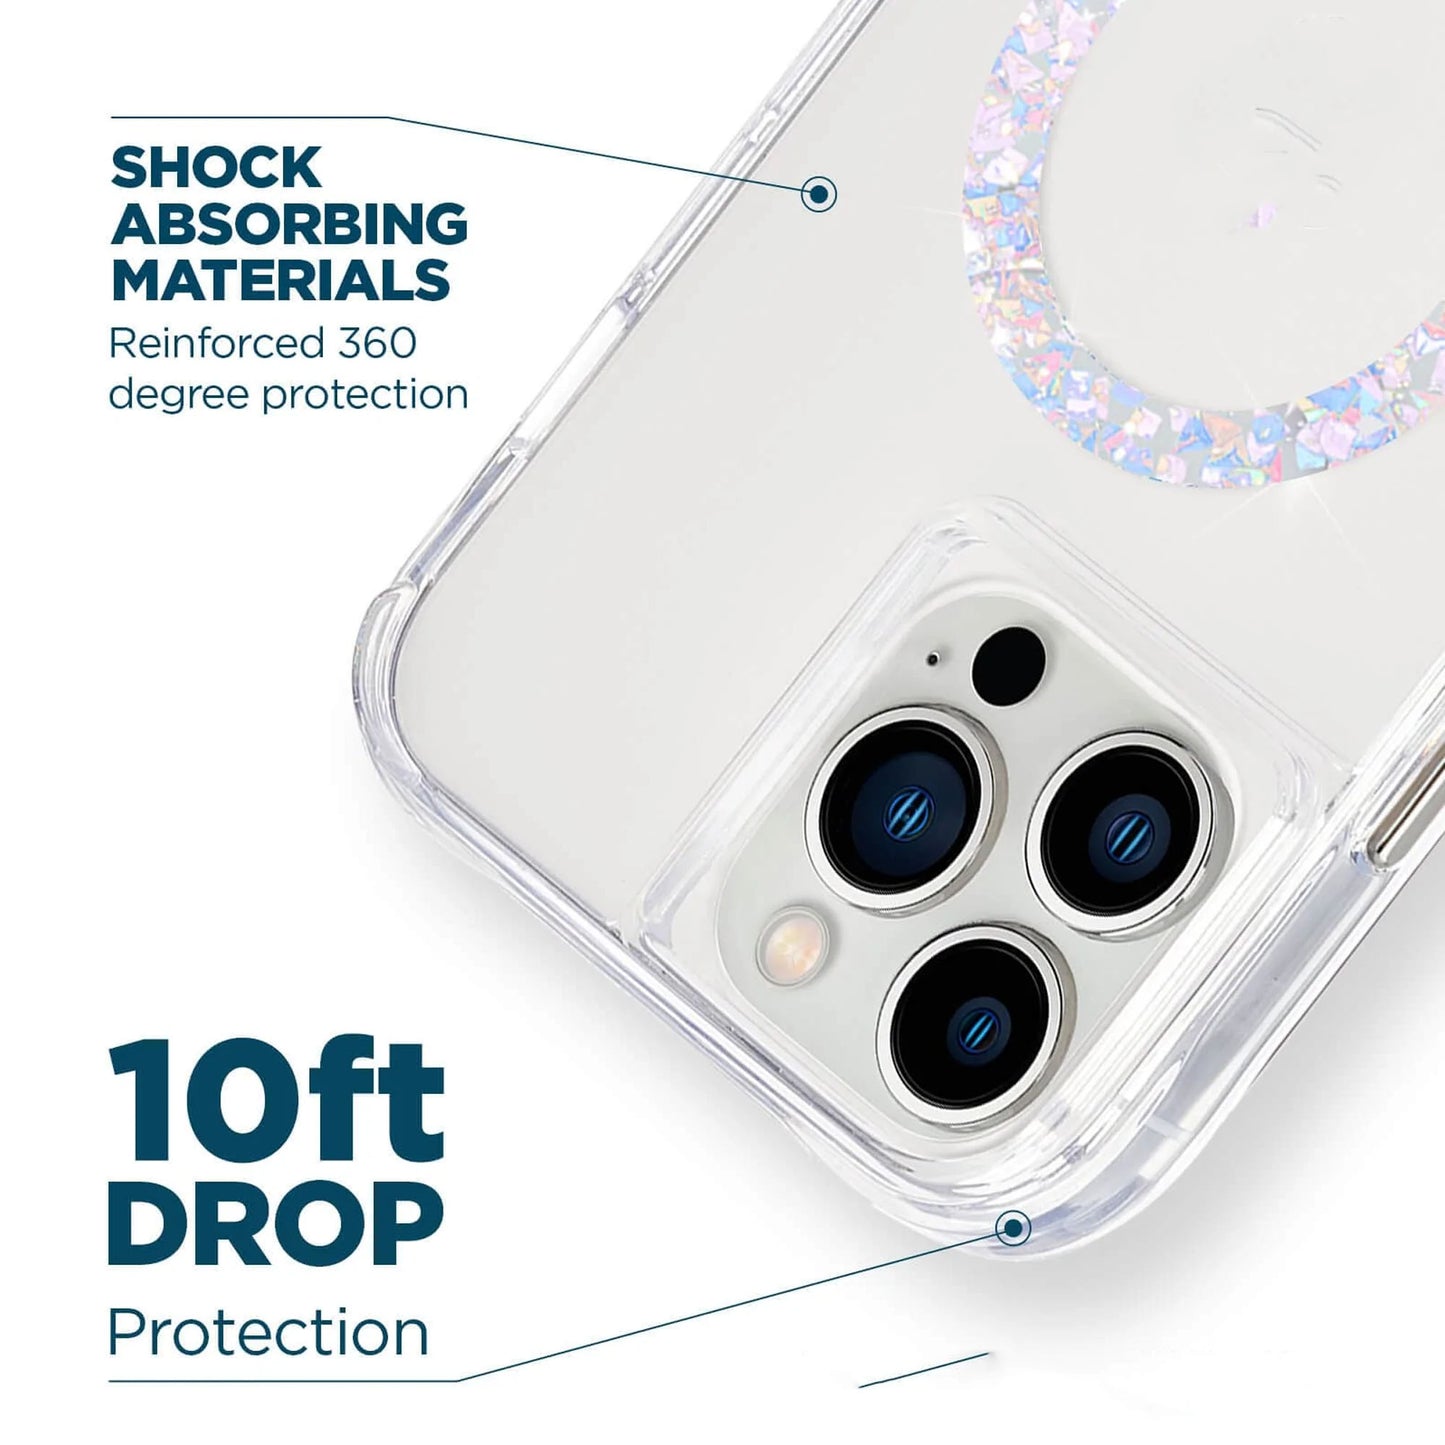 Case Mate Twinkle Diamond for iPhone 14 Plus - with Magsafe Compatible - Clear (Barcode: 840171719734 )